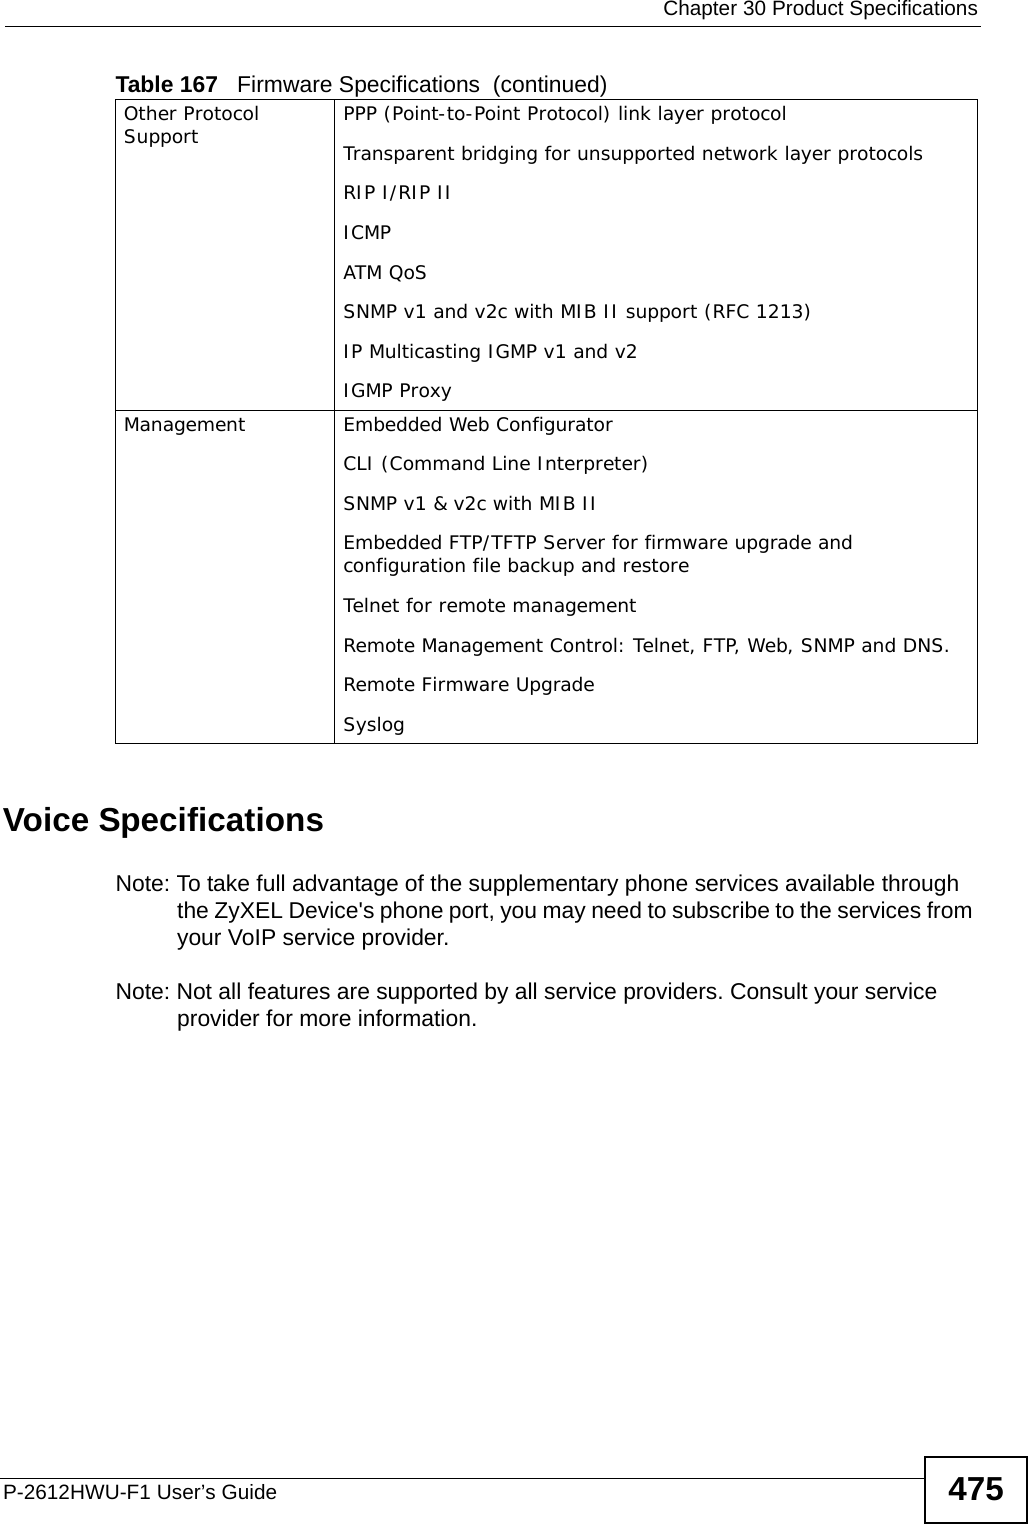  Chapter 30 Product SpecificationsP-2612HWU-F1 User’s Guide 475Voice SpecificationsNote: To take full advantage of the supplementary phone services available through the ZyXEL Device&apos;s phone port, you may need to subscribe to the services from your VoIP service provider.Note: Not all features are supported by all service providers. Consult your service provider for more information.Other Protocol Support PPP (Point-to-Point Protocol) link layer protocolTransparent bridging for unsupported network layer protocolsRIP I/RIP IIICMPATM QoS SNMP v1 and v2c with MIB II support (RFC 1213)IP Multicasting IGMP v1 and v2IGMP ProxyManagement Embedded Web ConfiguratorCLI (Command Line Interpreter)SNMP v1 &amp; v2c with MIB IIEmbedded FTP/TFTP Server for firmware upgrade and configuration file backup and restoreTelnet for remote managementRemote Management Control: Telnet, FTP, Web, SNMP and DNS.Remote Firmware Upgrade SyslogTable 167   Firmware Specifications  (continued)